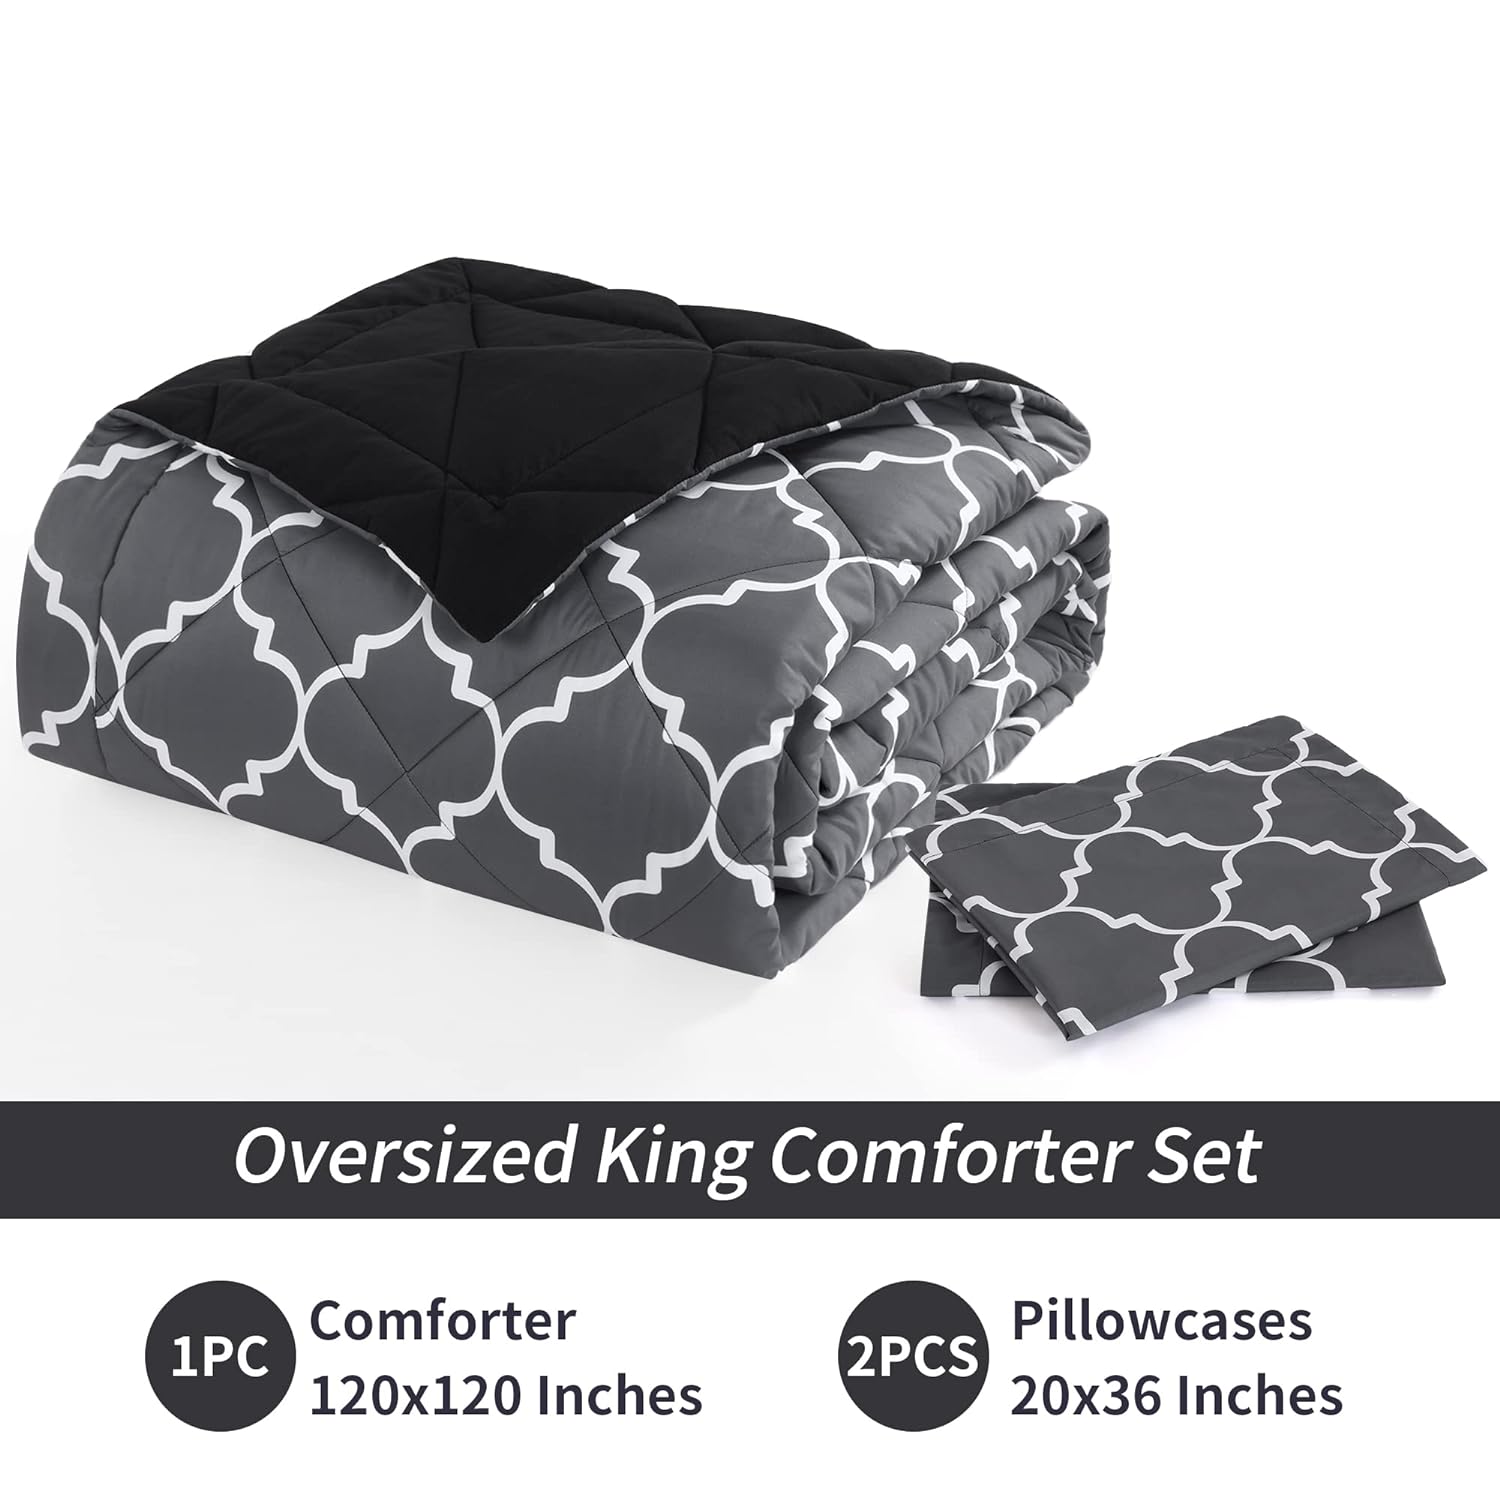 Great Choice Products Oversized King Comforter Set 120X120, Ultra Soft Microfiber Reversible Bedding Sets For King Bed, Down Alternative Comfo…